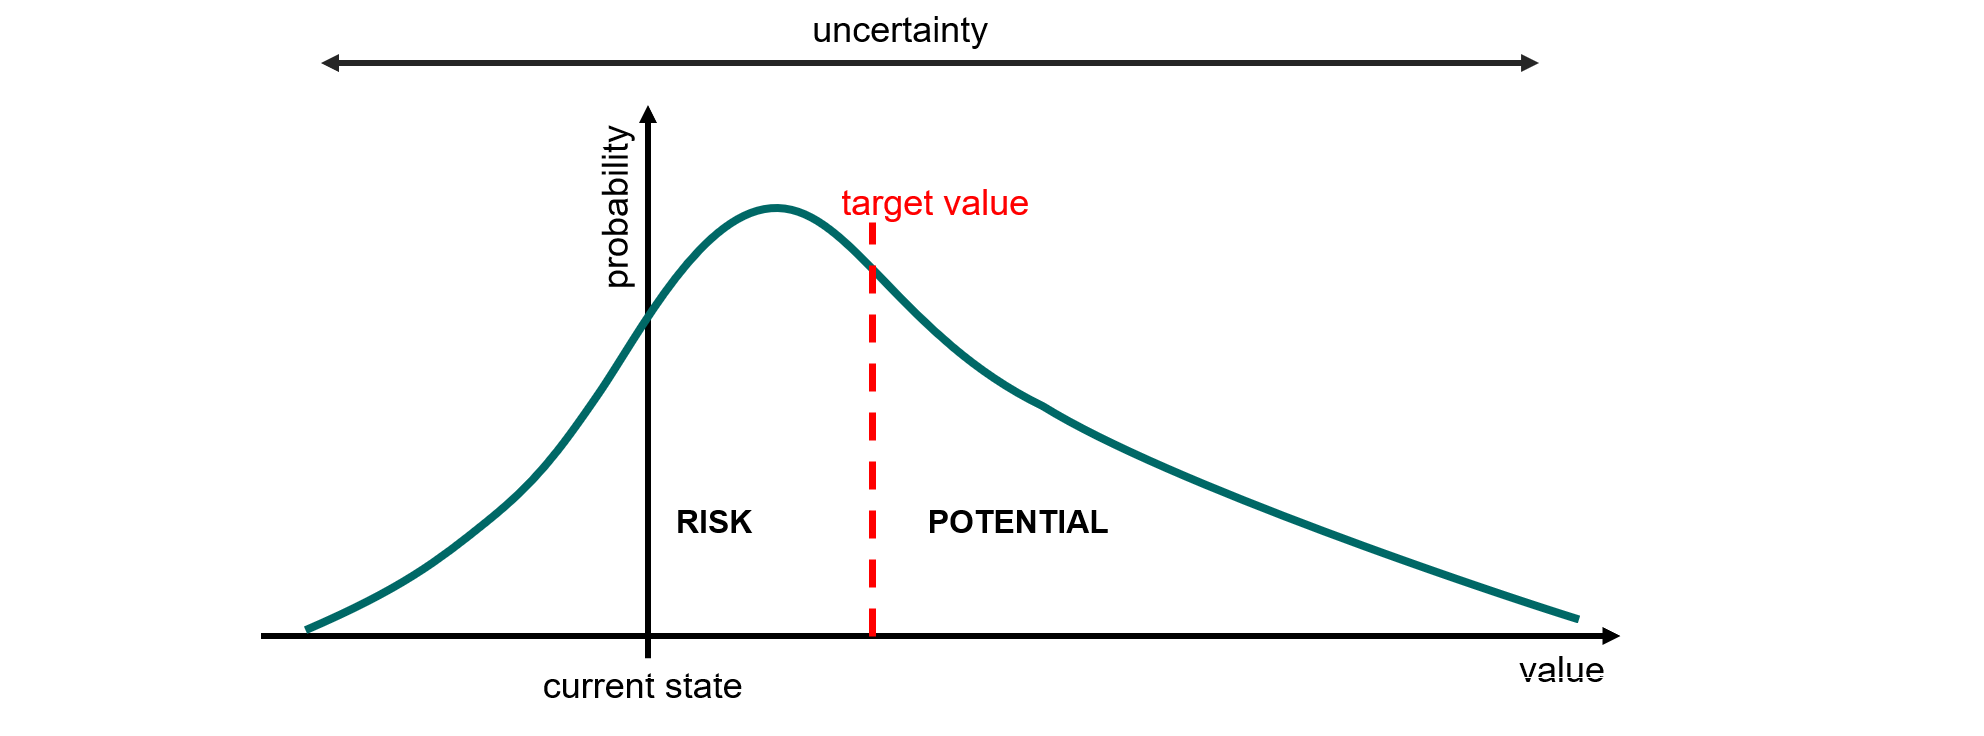 The illustration of risk and potential in a probability distribution.